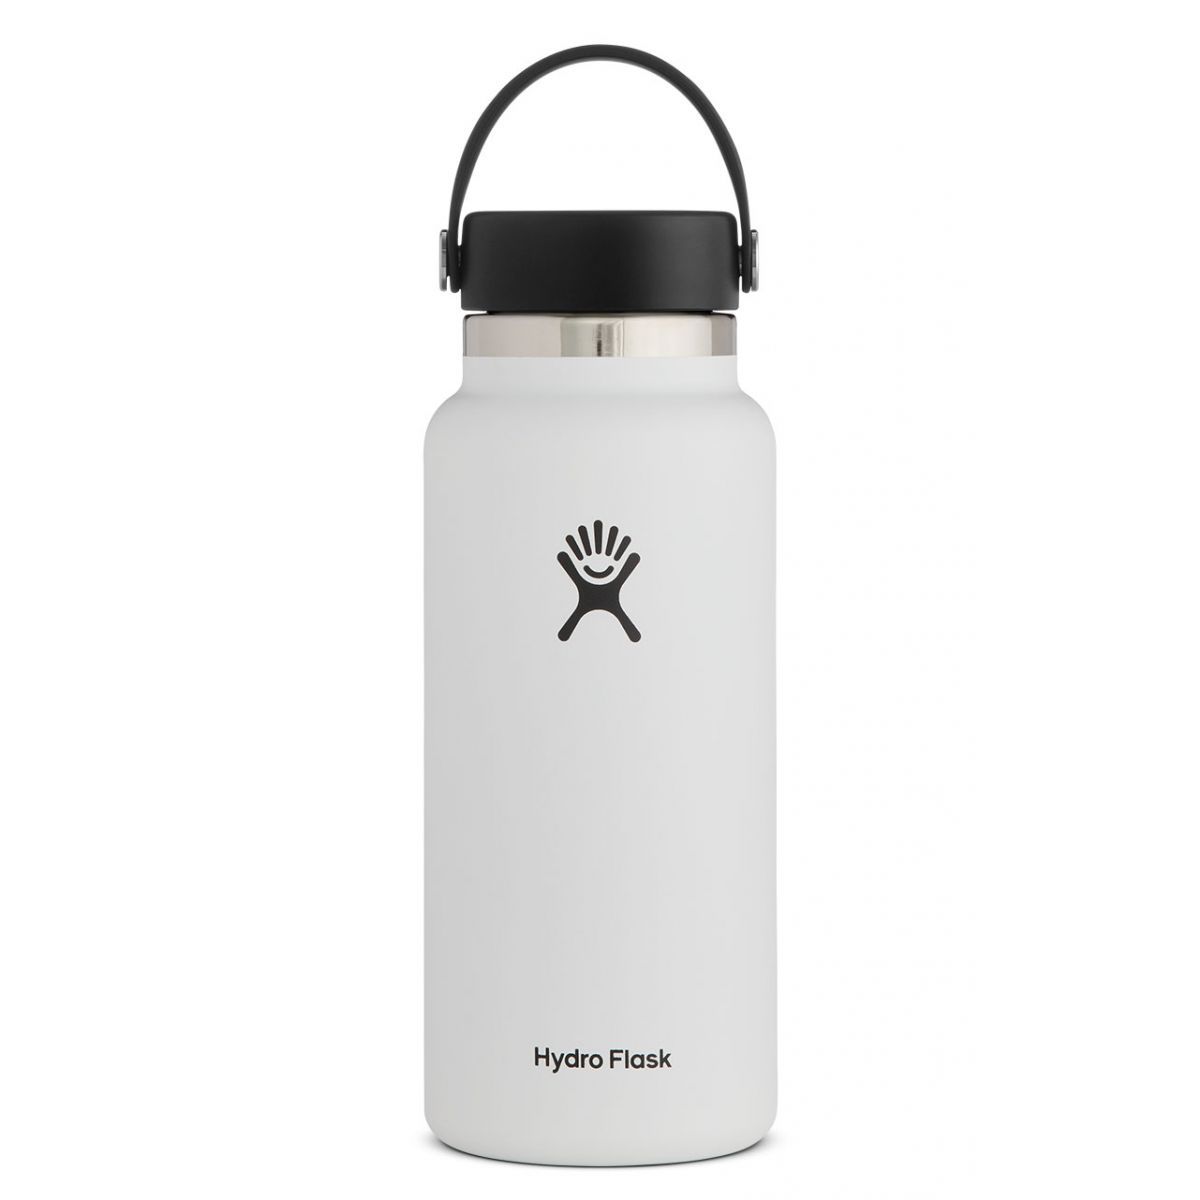 Hydro Flask Insulated Bottle Hydro Flask 32 oz Wide Mouth Bottle White